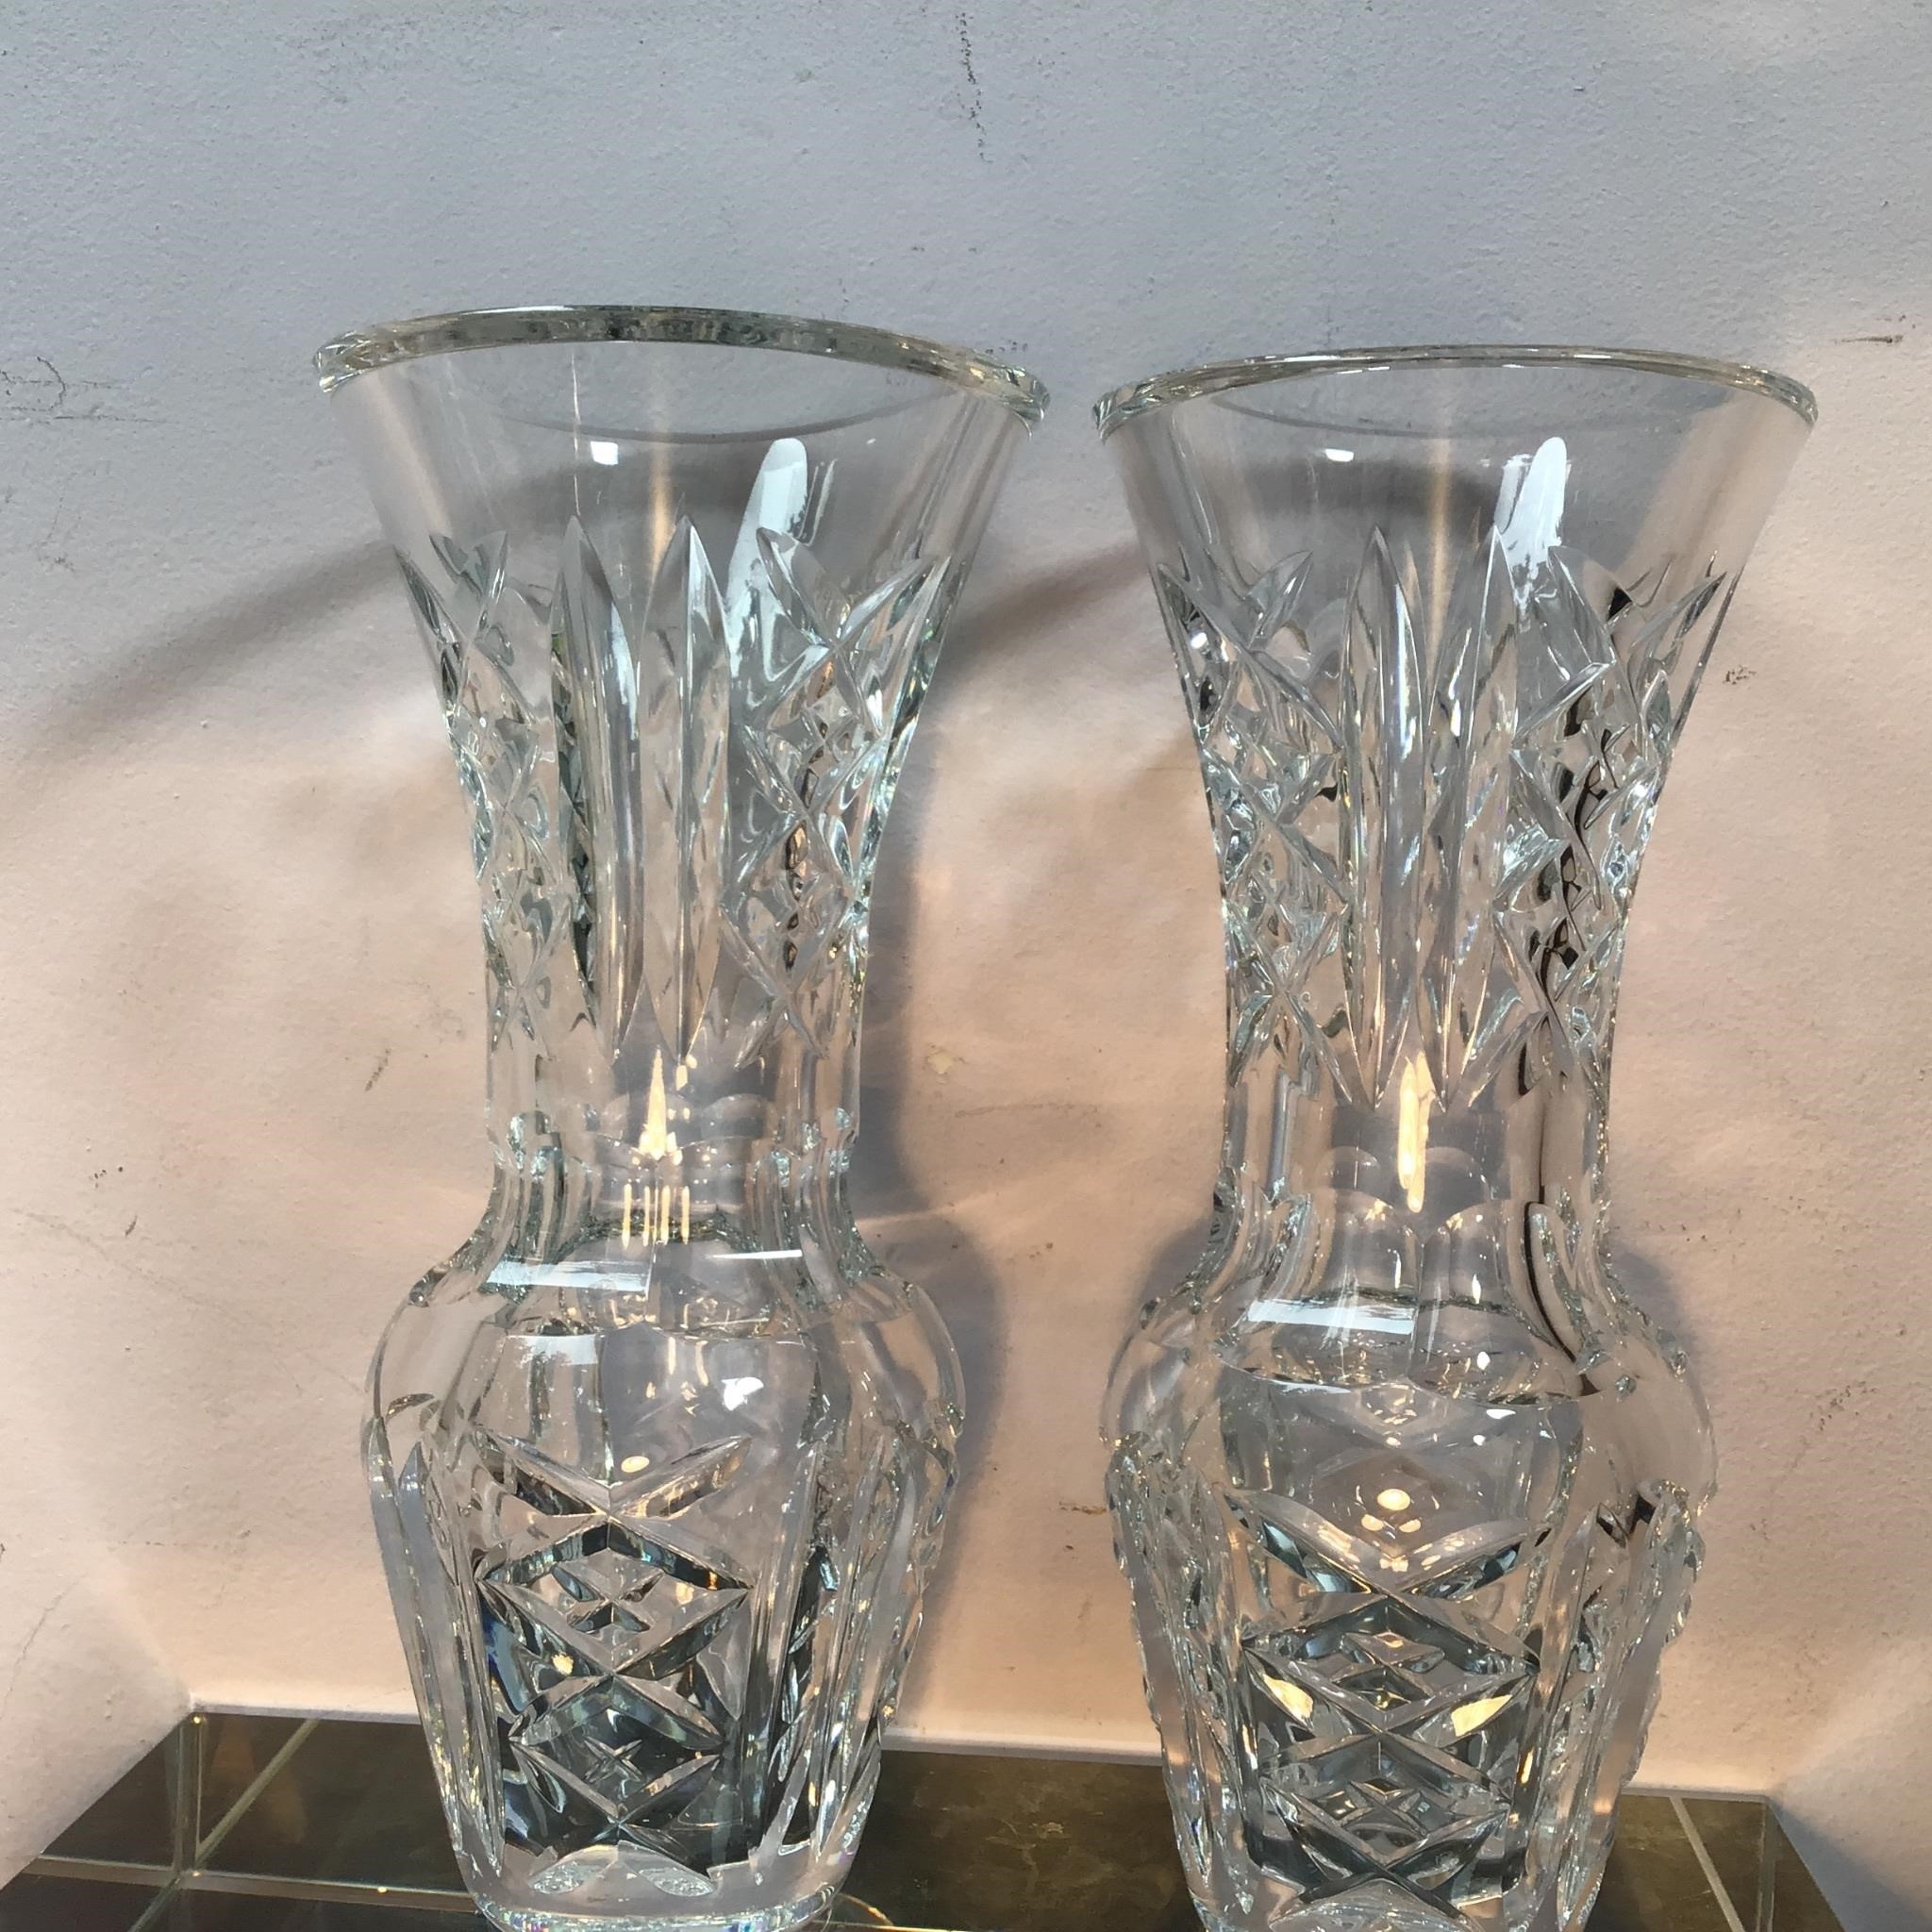 PAIR WATERFORD CRYSTAL VASES ETCHED SIGNATURE